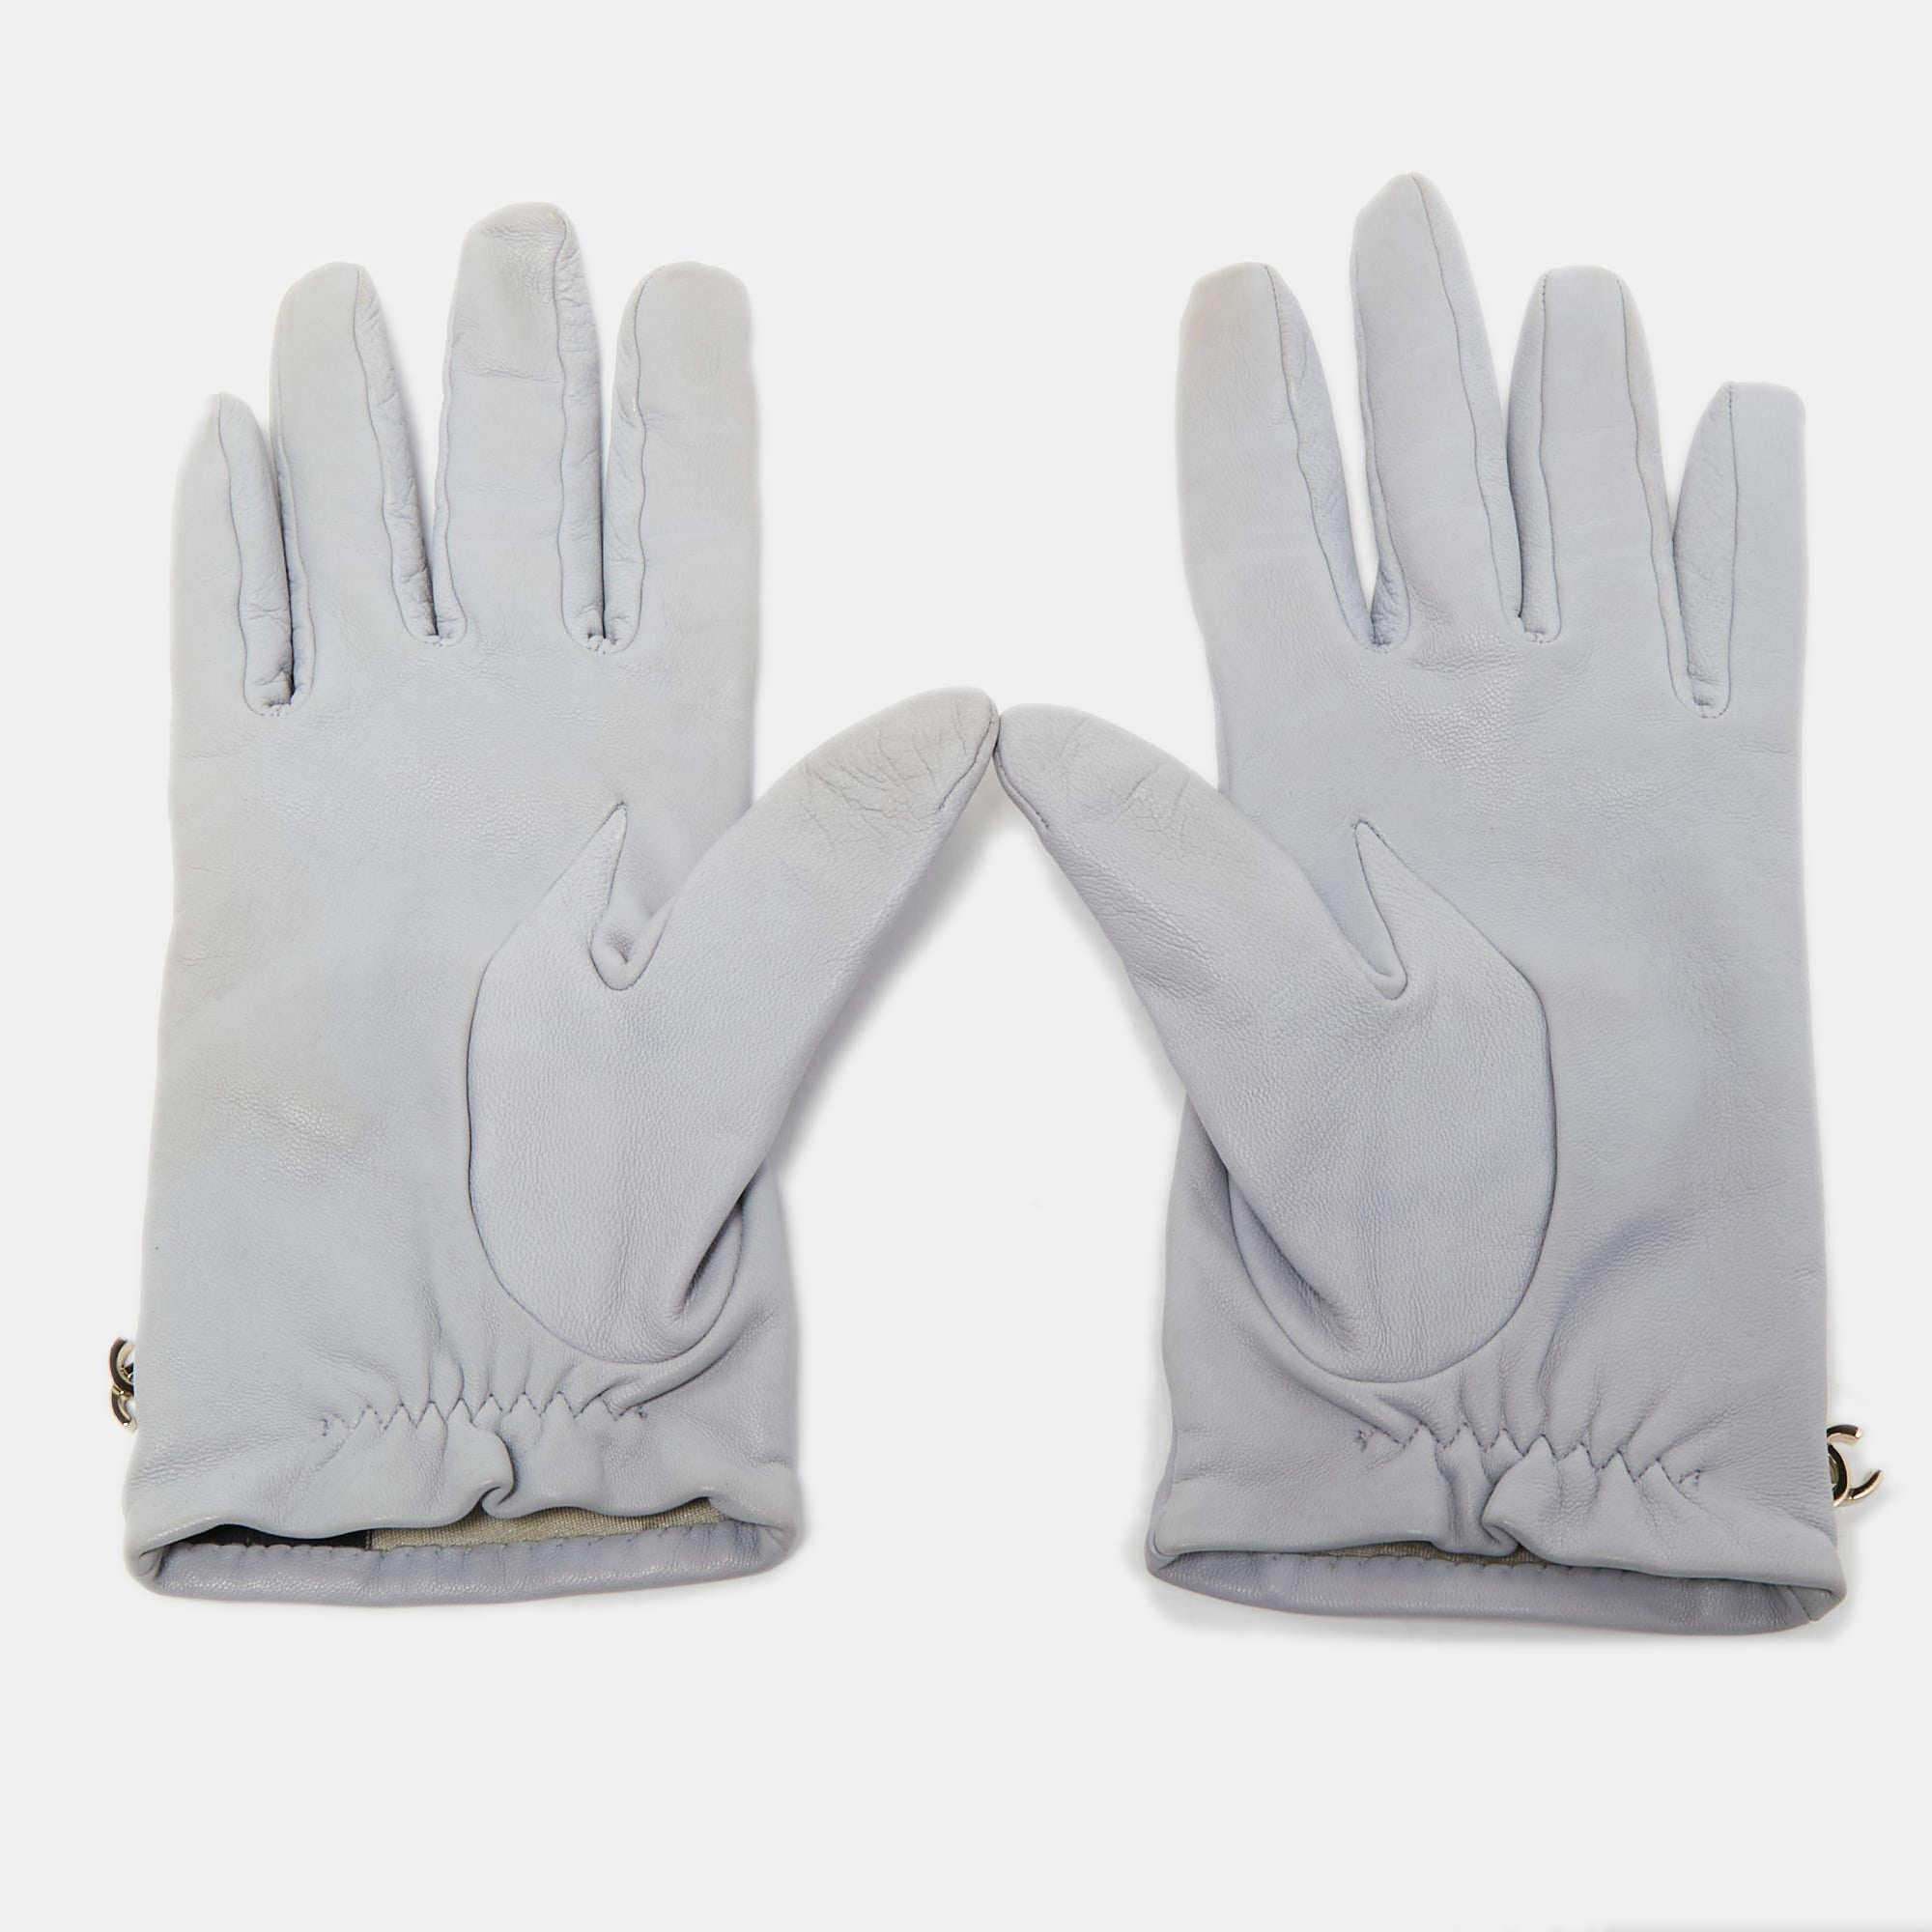 These gloves from Chanel are crafted from quality materials and are comfortable to wear. Create a super-stylish winter look with this pair!

Includes: Original Box

